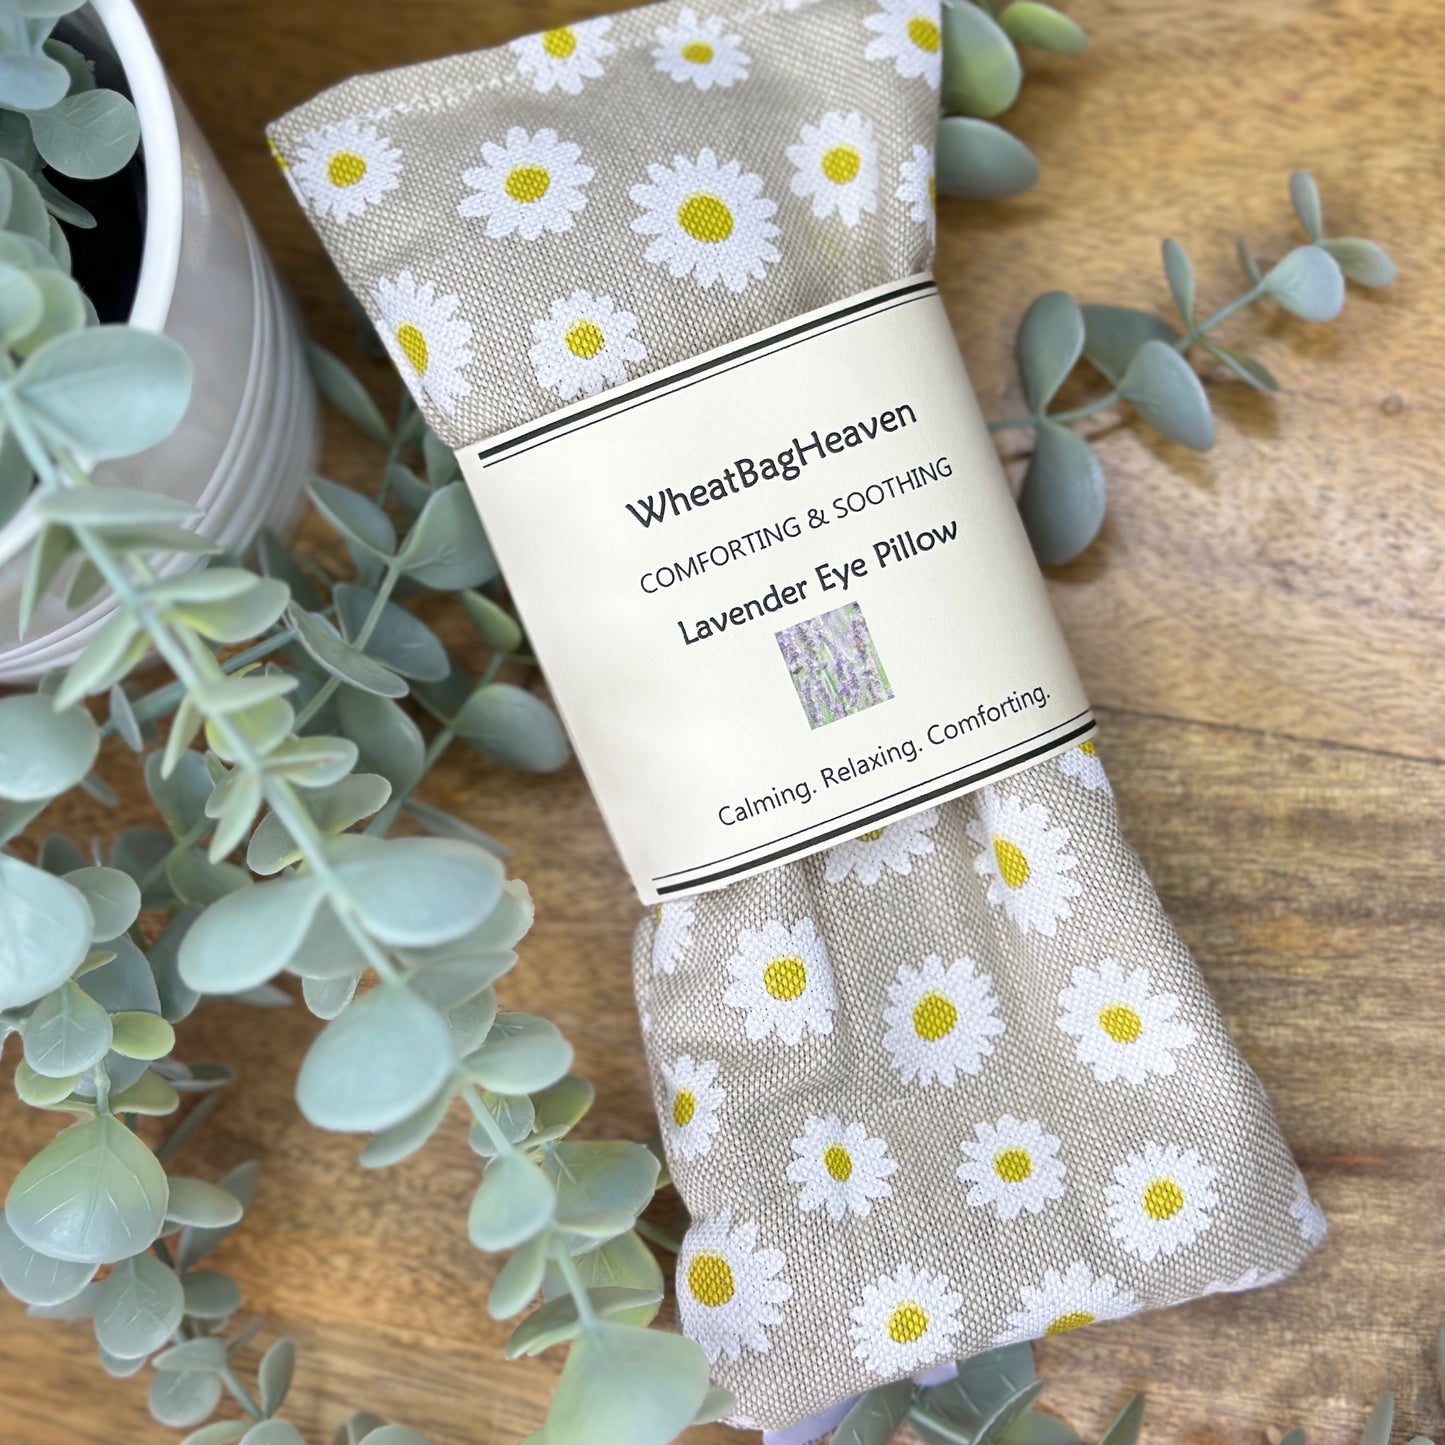 lovely daisy cotton print eye pillow for dry irritated eye relief. Handmade by WheatBagHeaven and ready to despatch with free UK shipping 